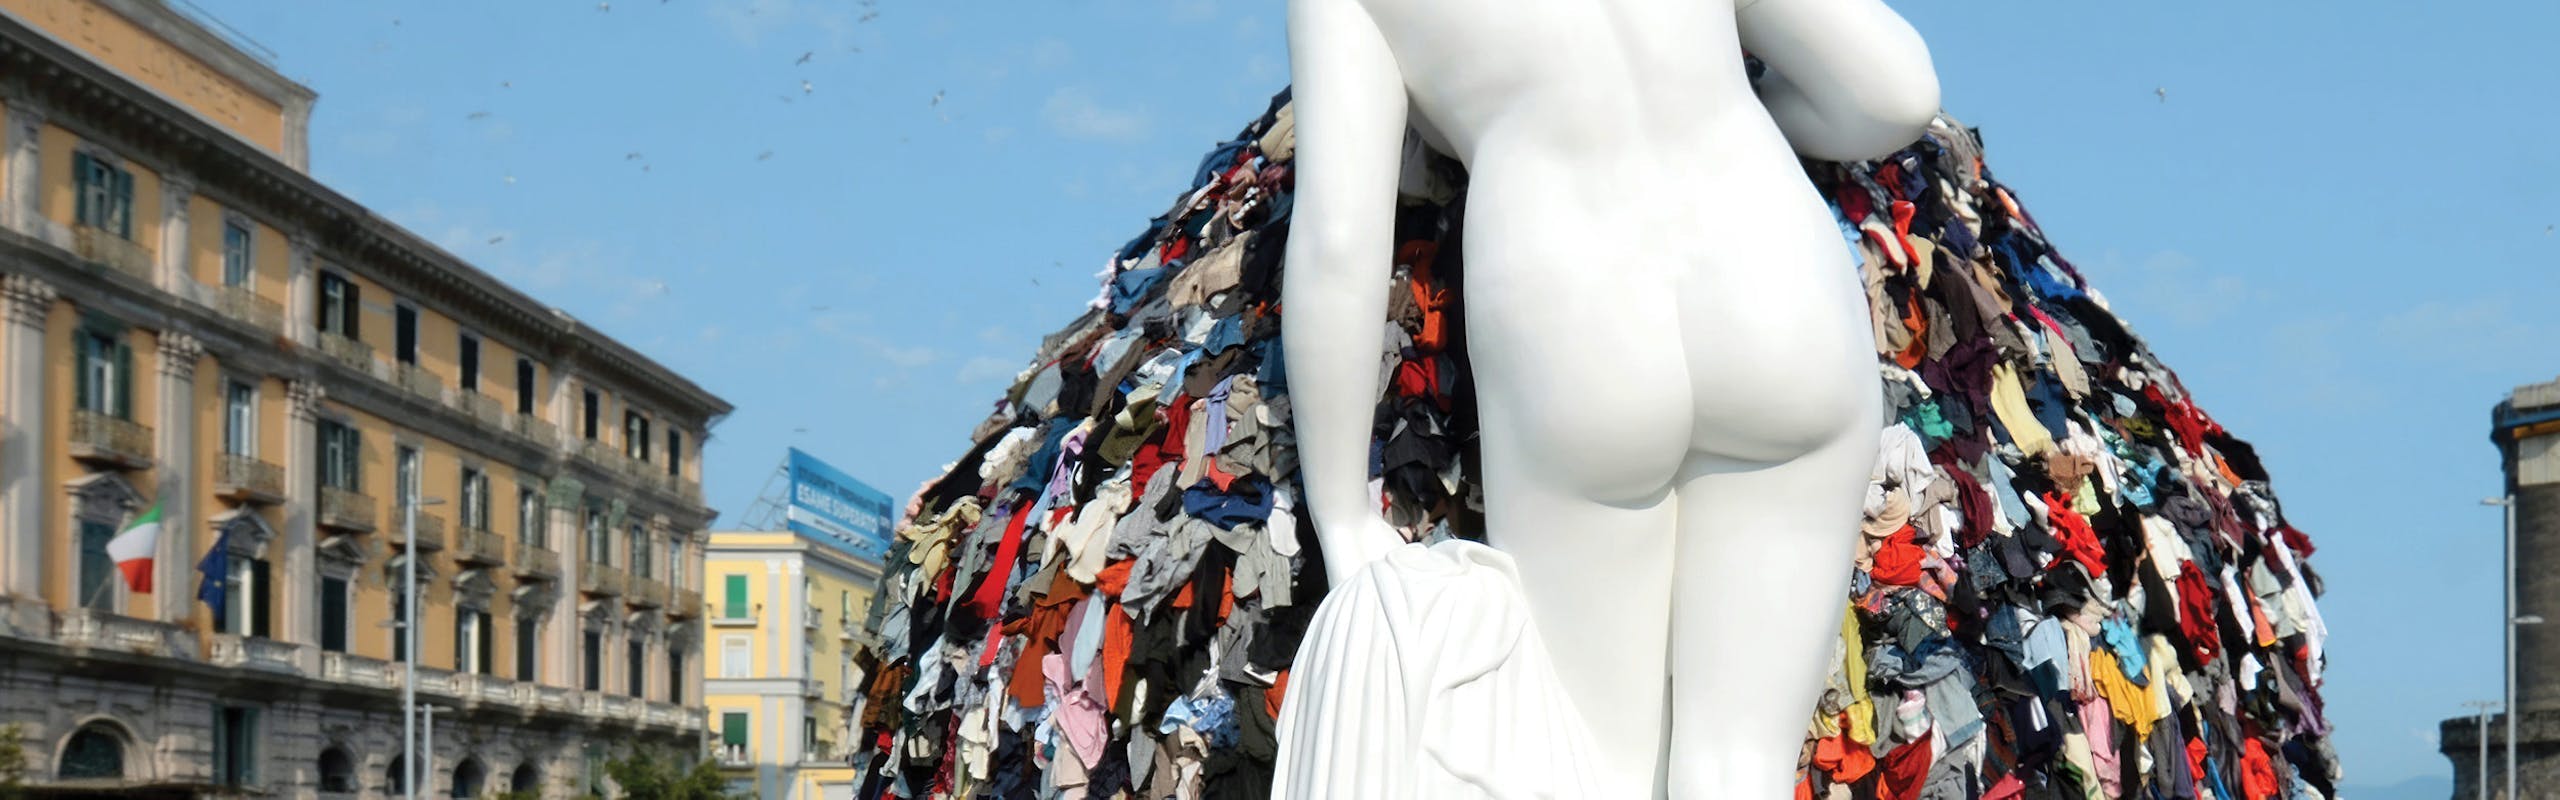 Art installation, rags, colorful, artist installation in Italy